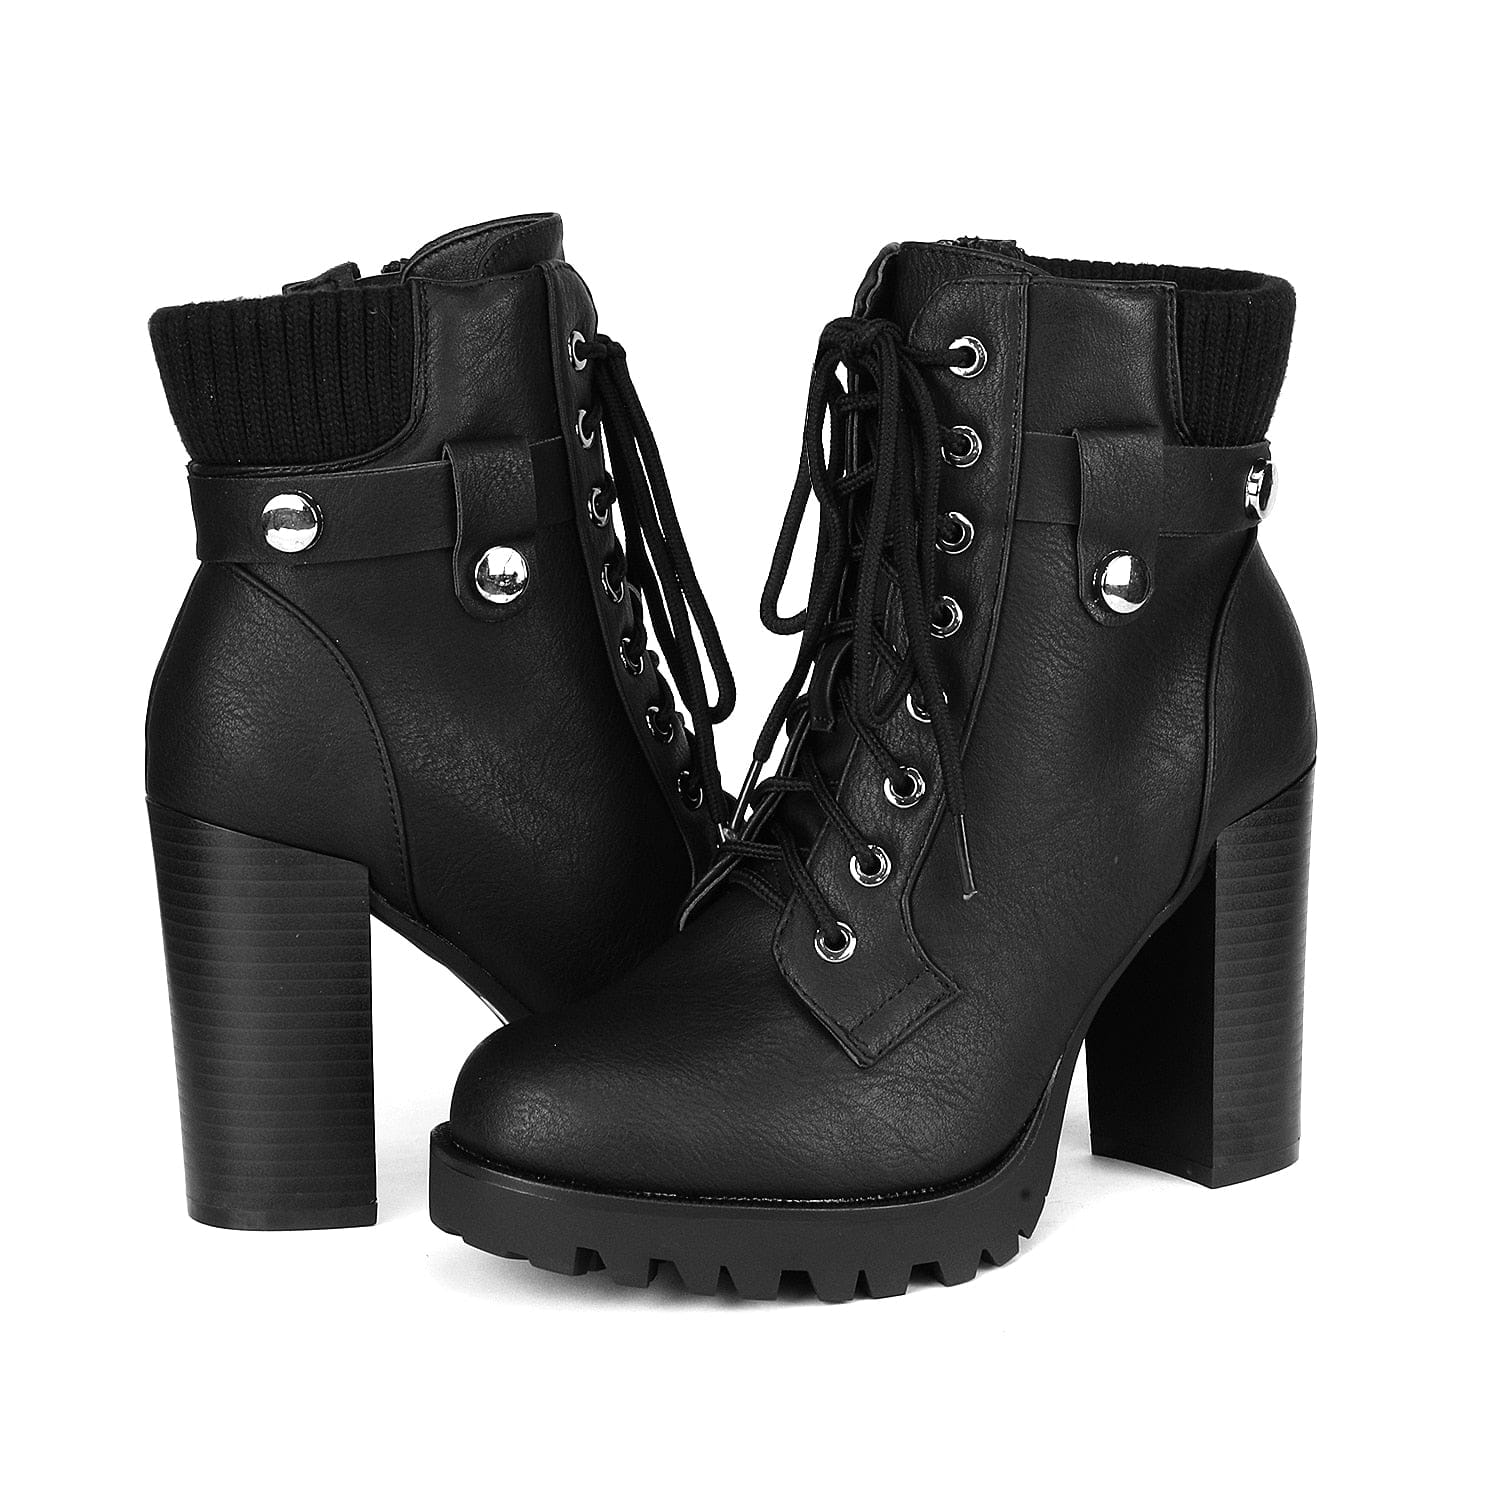 Women's Fashion Ankle Boots Chunky High Heel BENNYS 